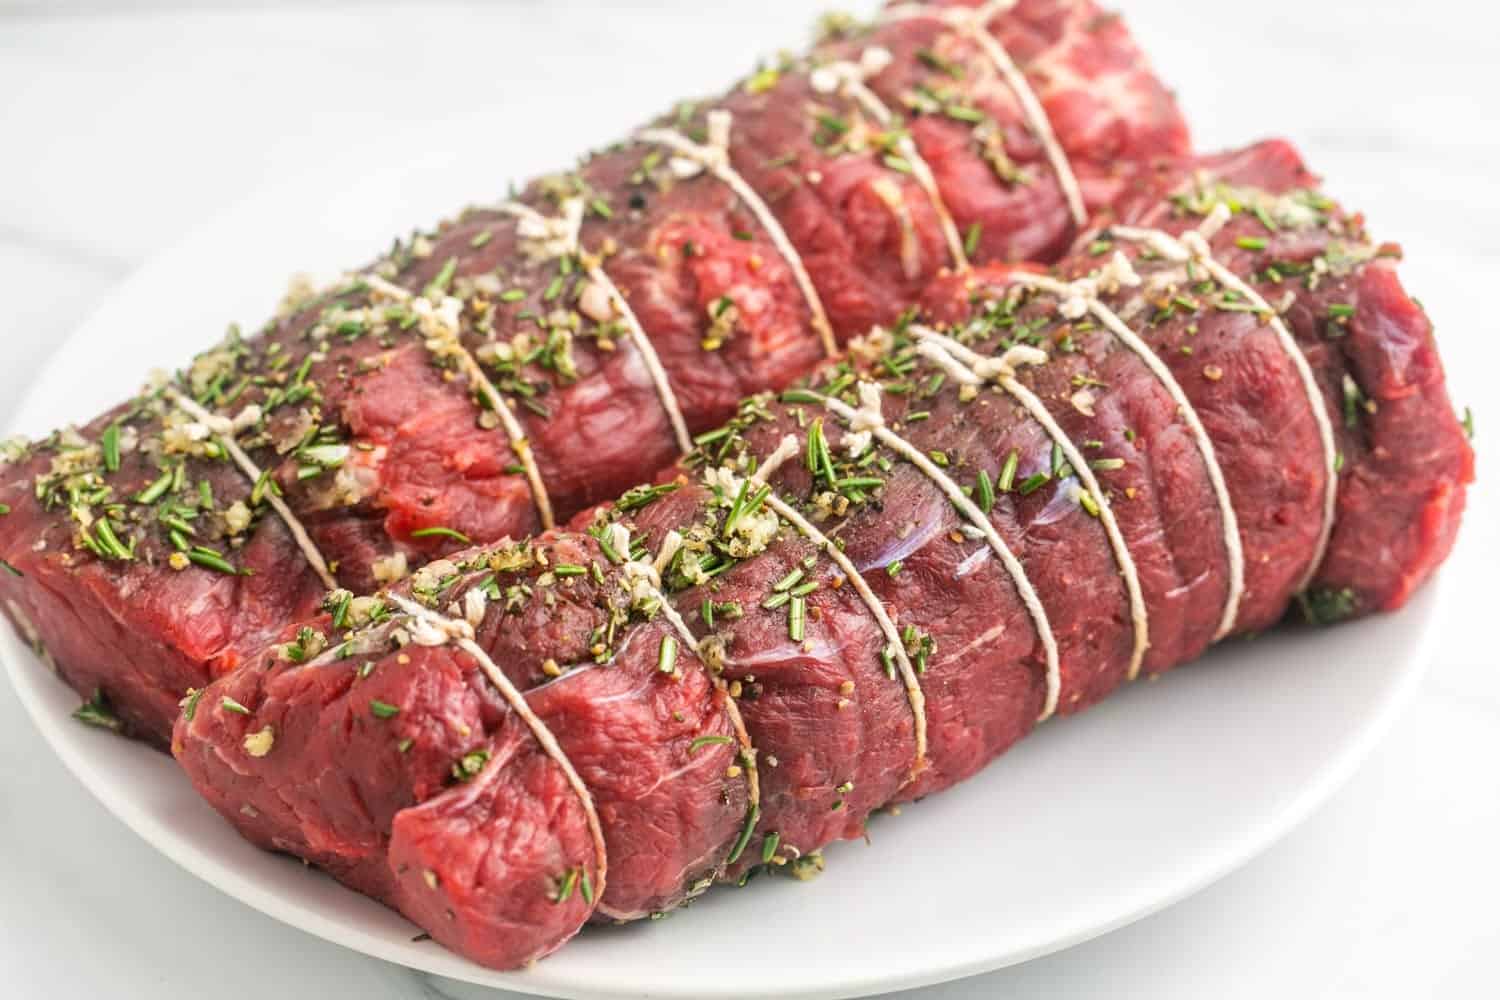 2 pieces of beef tenderloin seasoned with garlic, rosemary, salt and pepper and trussed with kitchen twine.